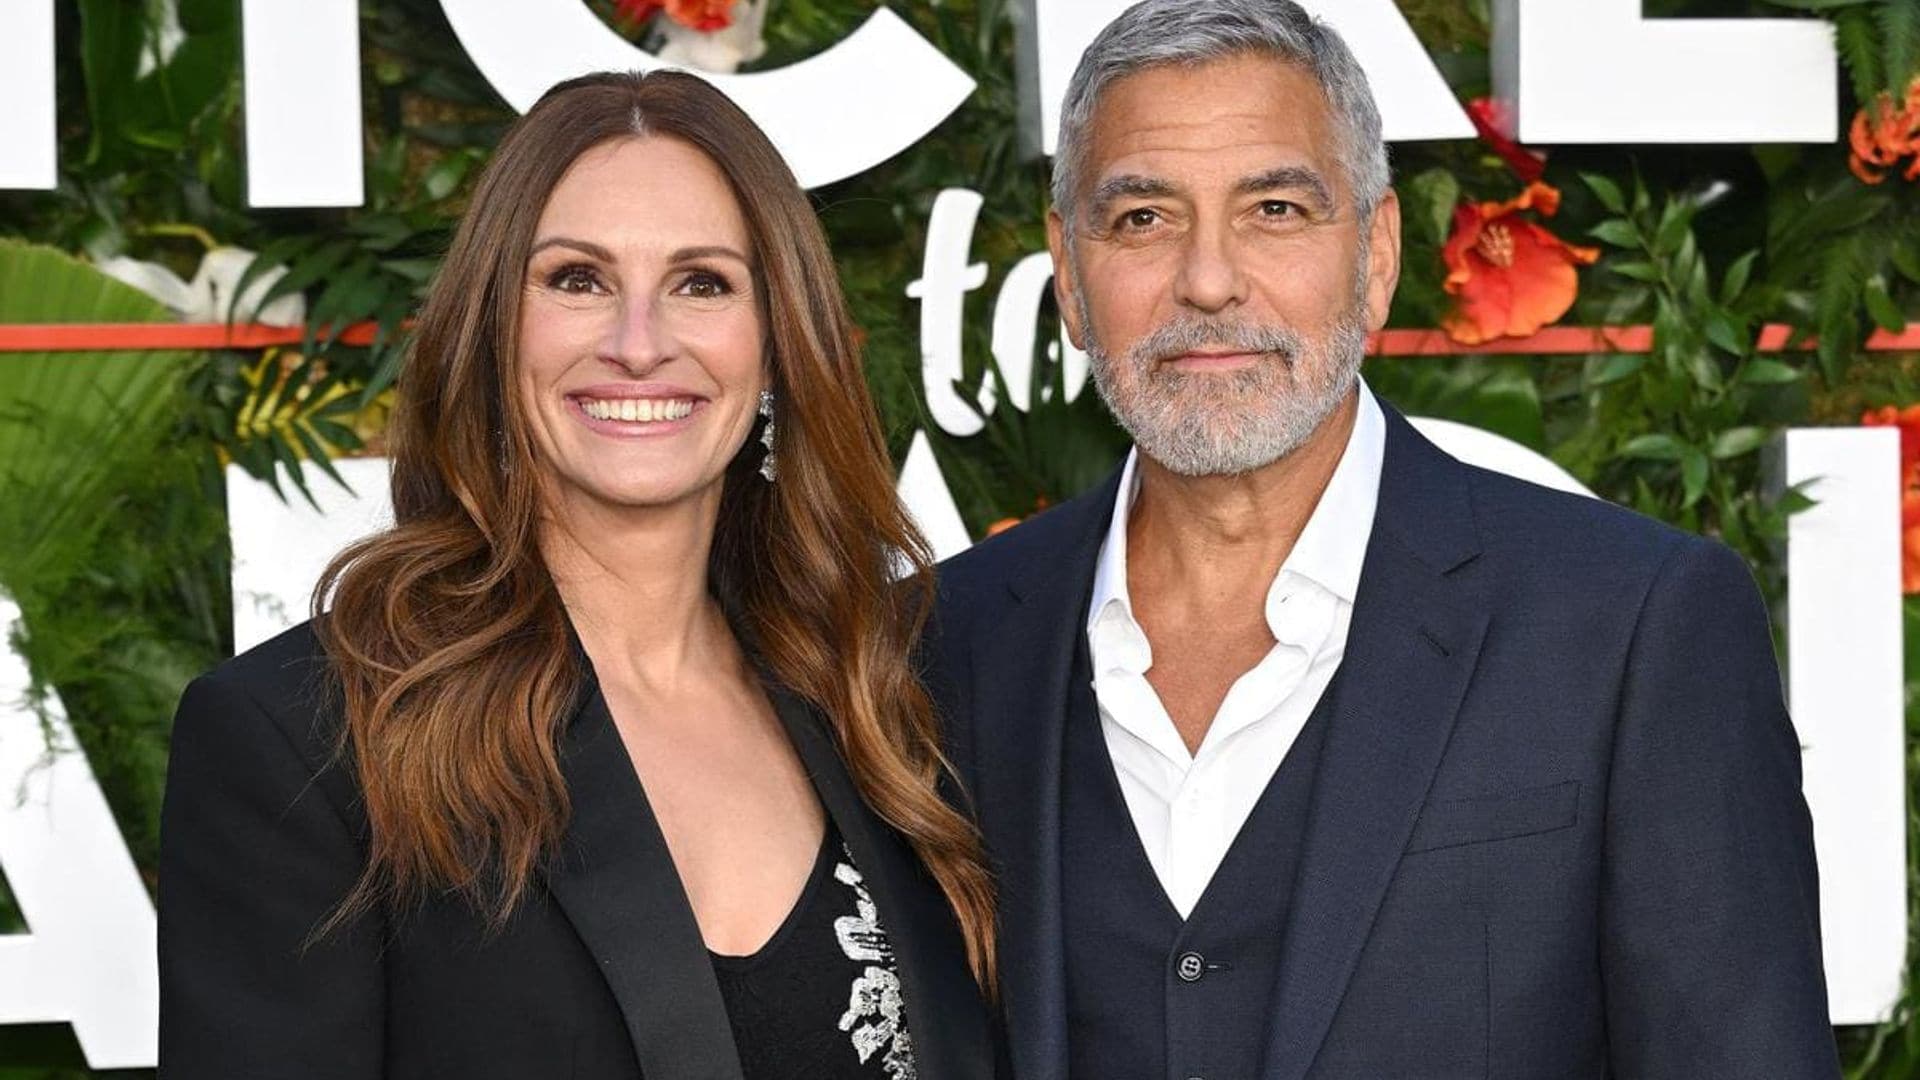 George Clooney and Julia Roberts on being older parents and missing experiences in their kids lives